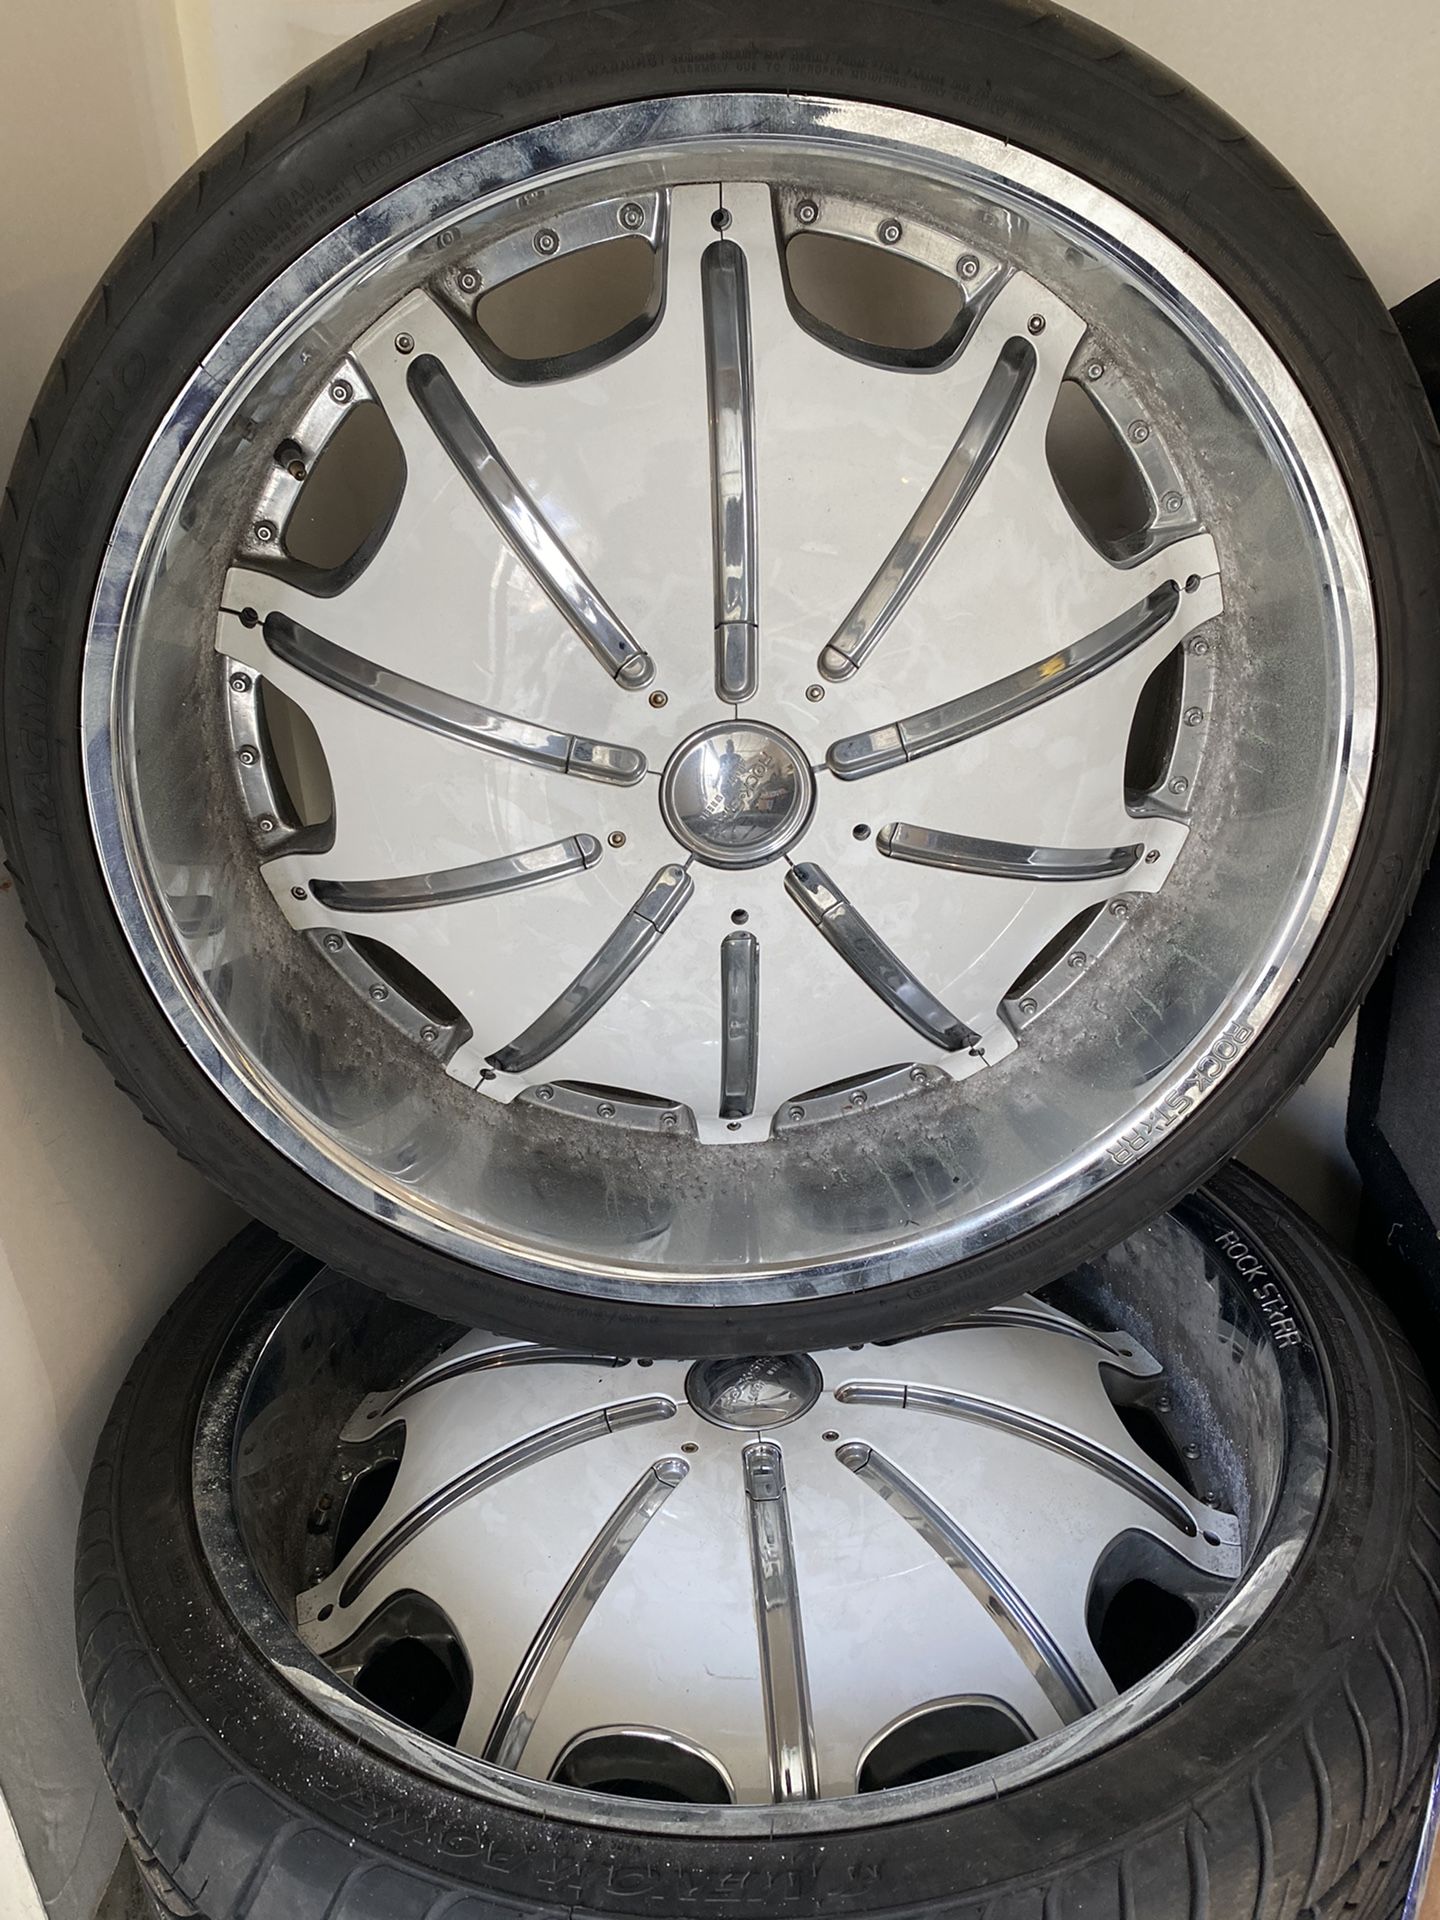 26in Wheels And Tires For Sale “Big Boy Look”